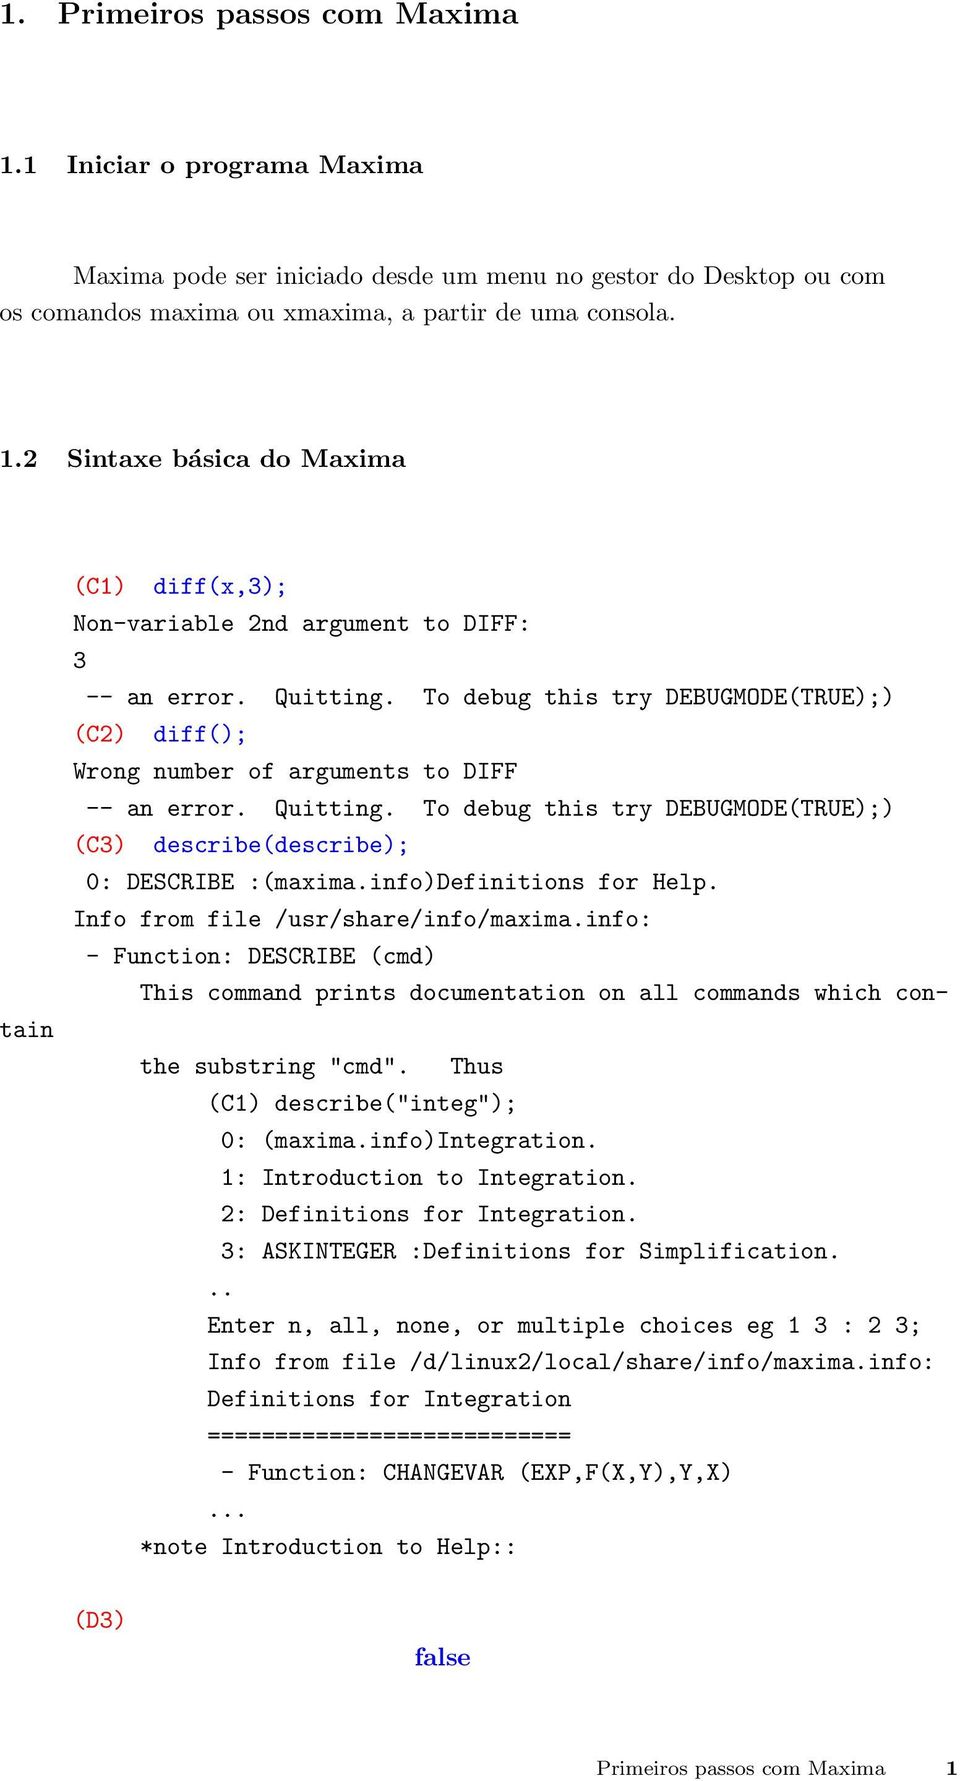 info)definitions for Help. Info from file /usr/share/info/maxima.info: - Function: DESCRIBE (cmd) This command prints documentation on all commands which contain the substring "cmd".